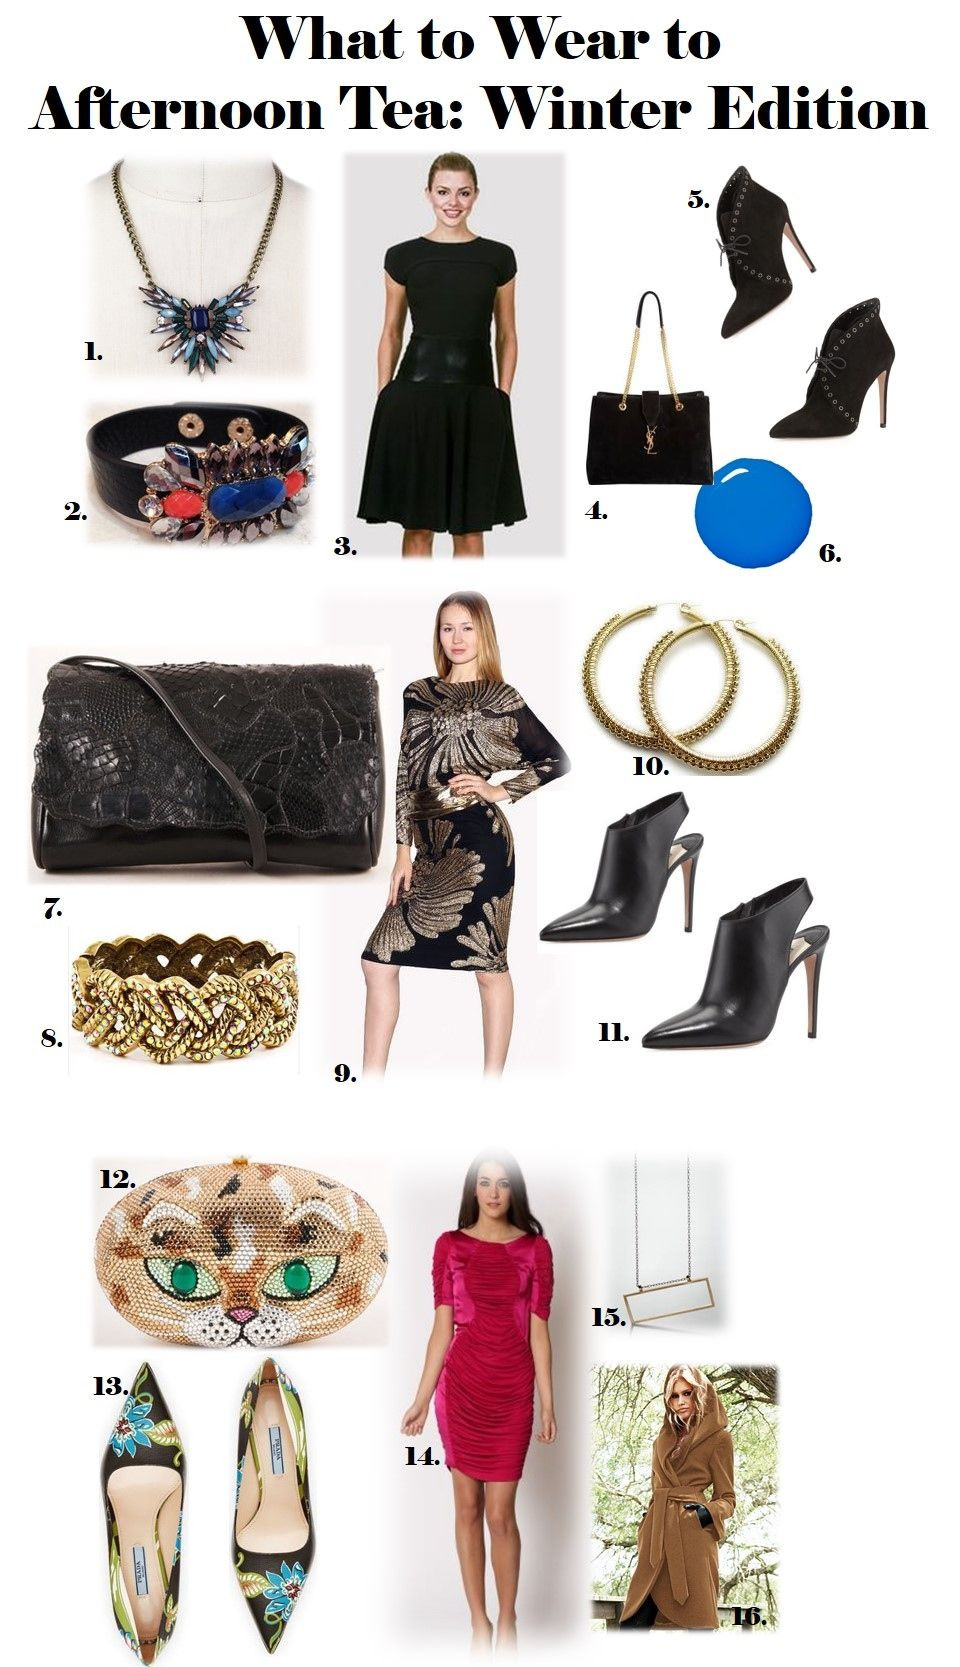 What To Wear To A Party In Winter
 What to Wear to Afternoon Tea The Winter Edition